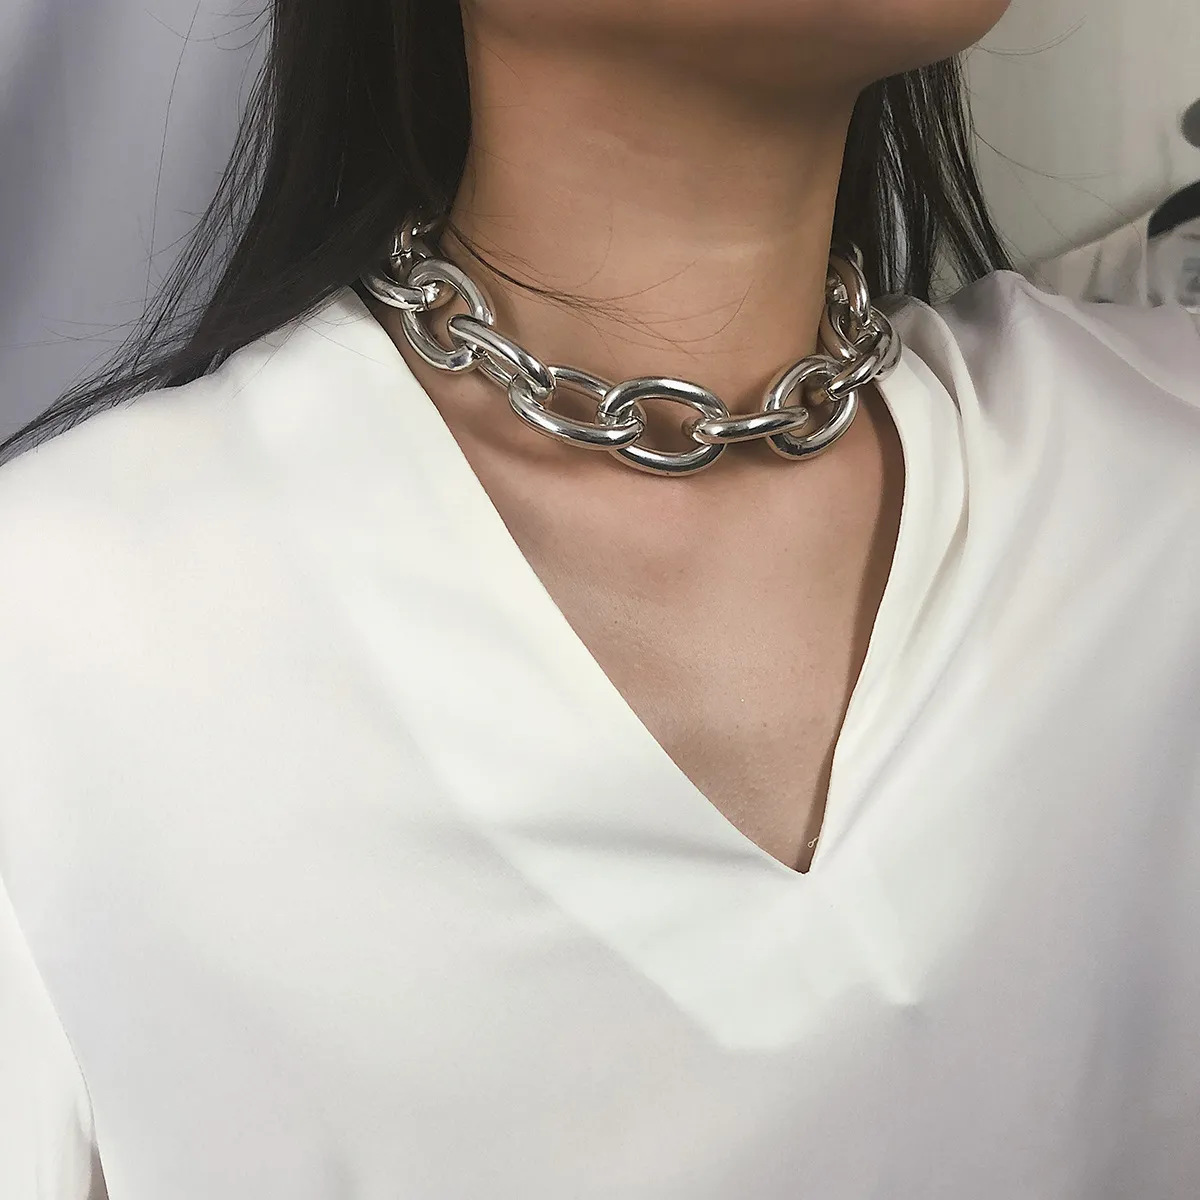 Buy Silver Statement Necklace Sterling Silver Choker Necklace Chunky Silver  Necklace 925 Silver Necklace Handmade Necklace Solid Silver Online in India  - Etsy